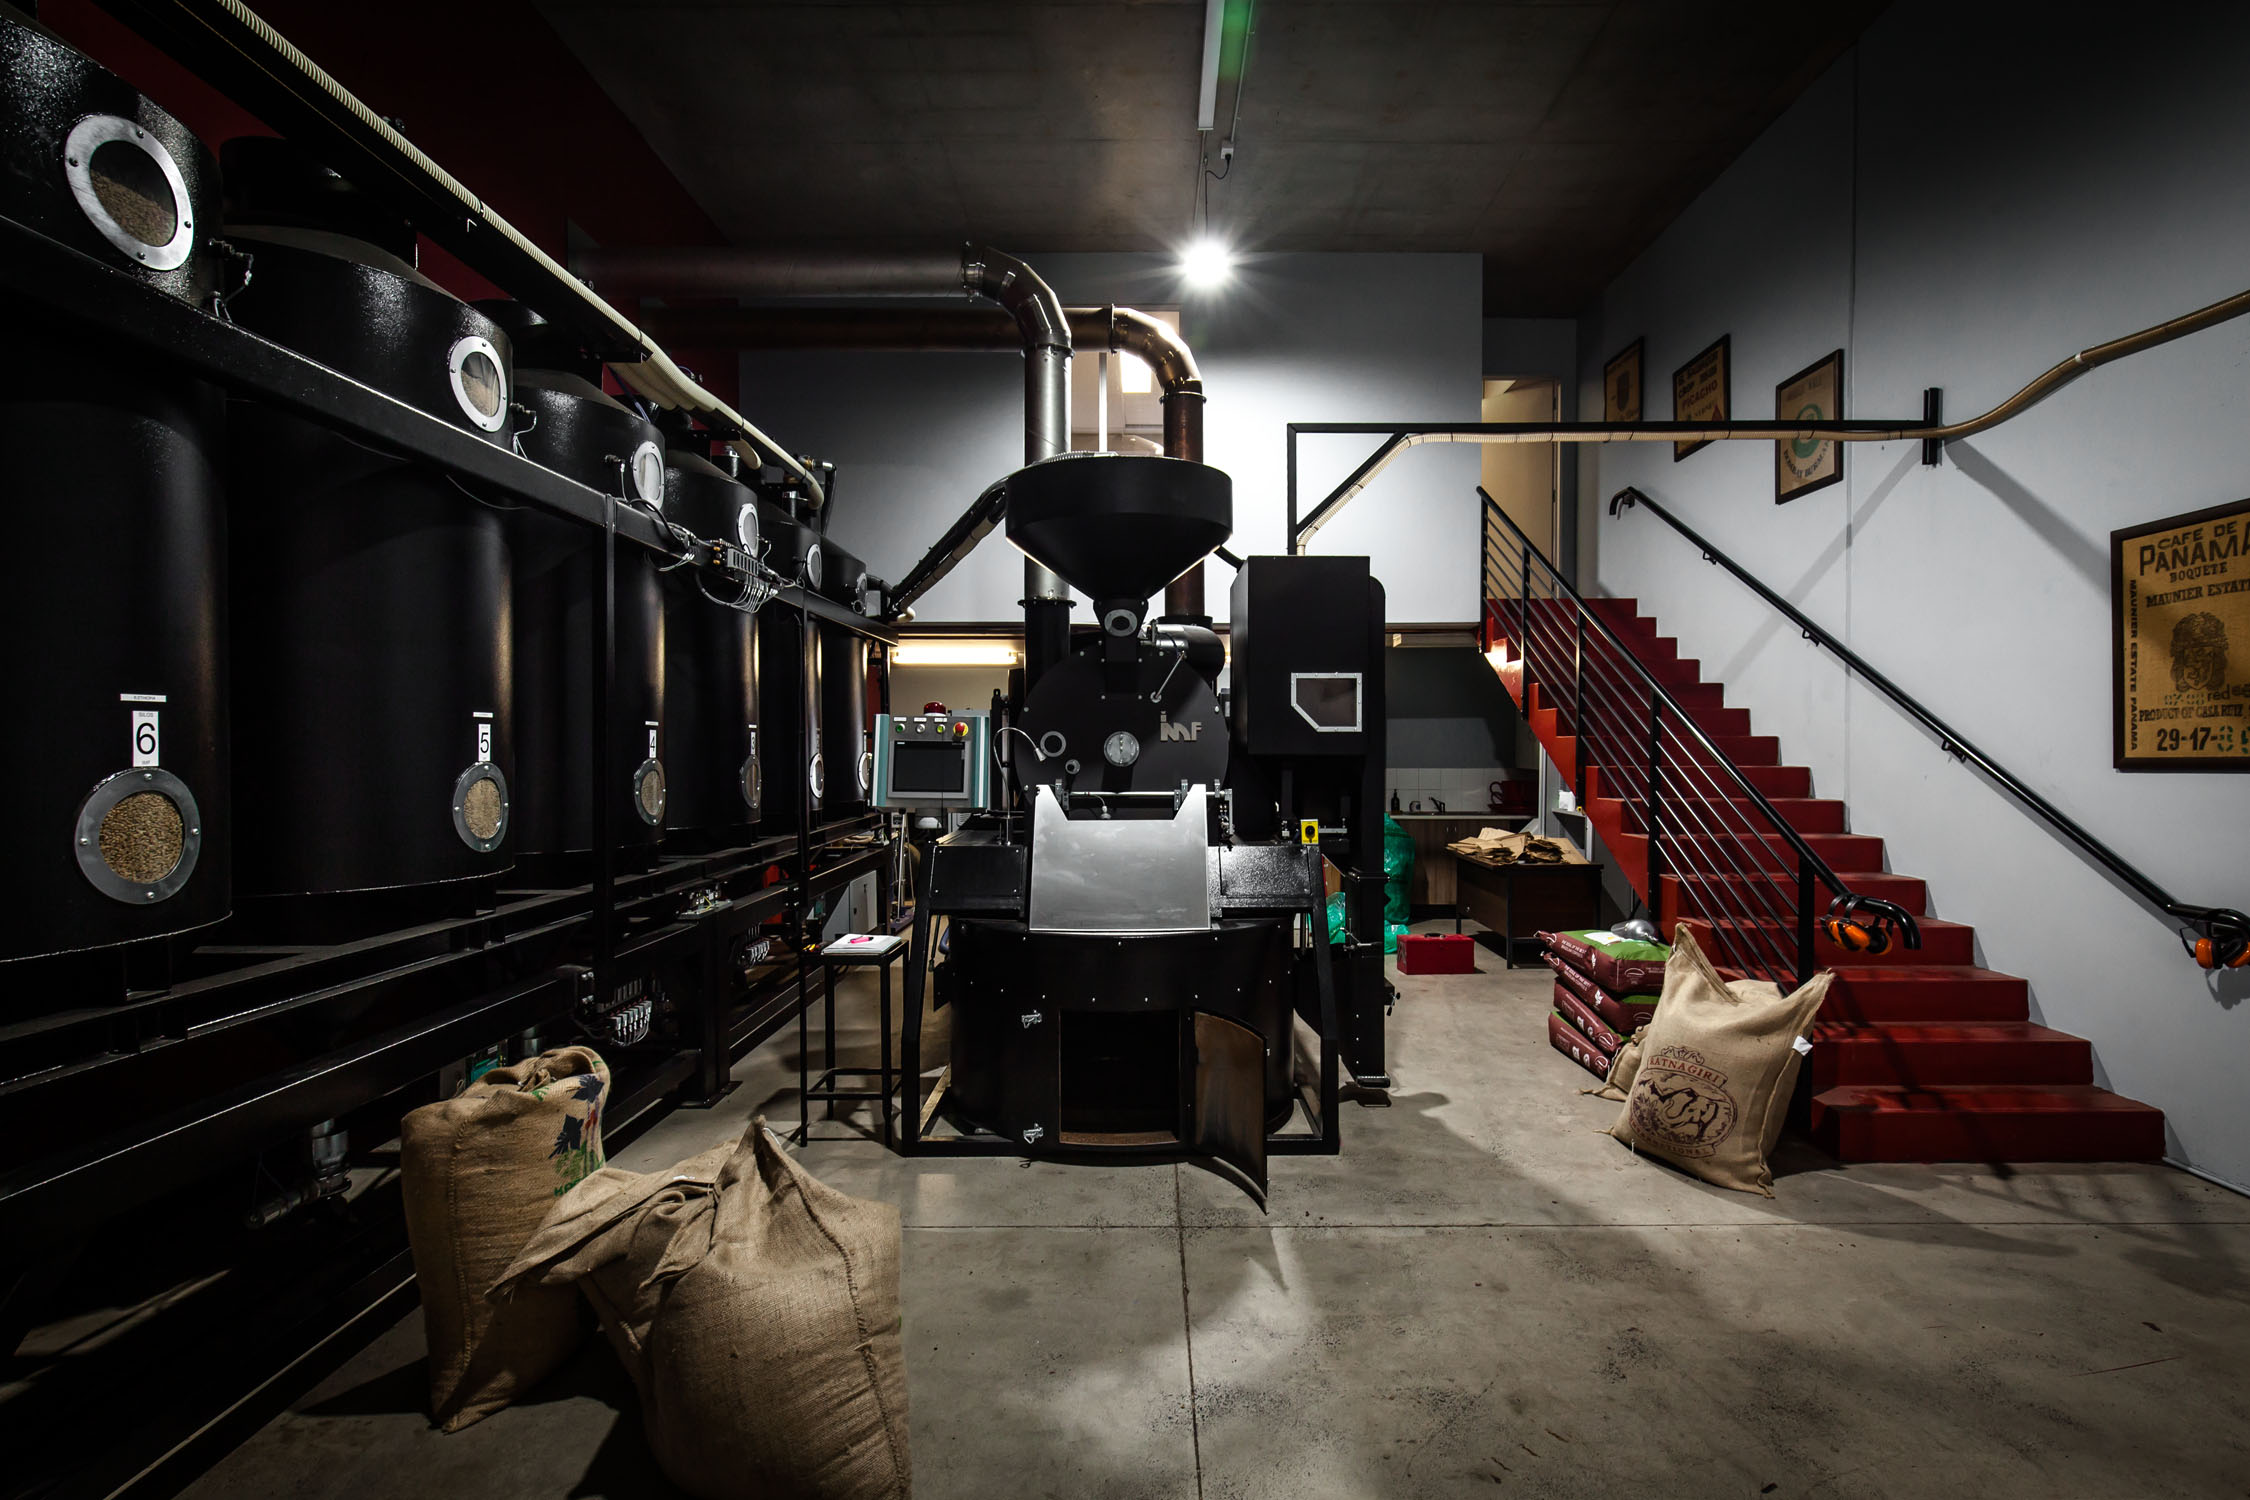 Shippit case study Little Italy Coffee Roasters